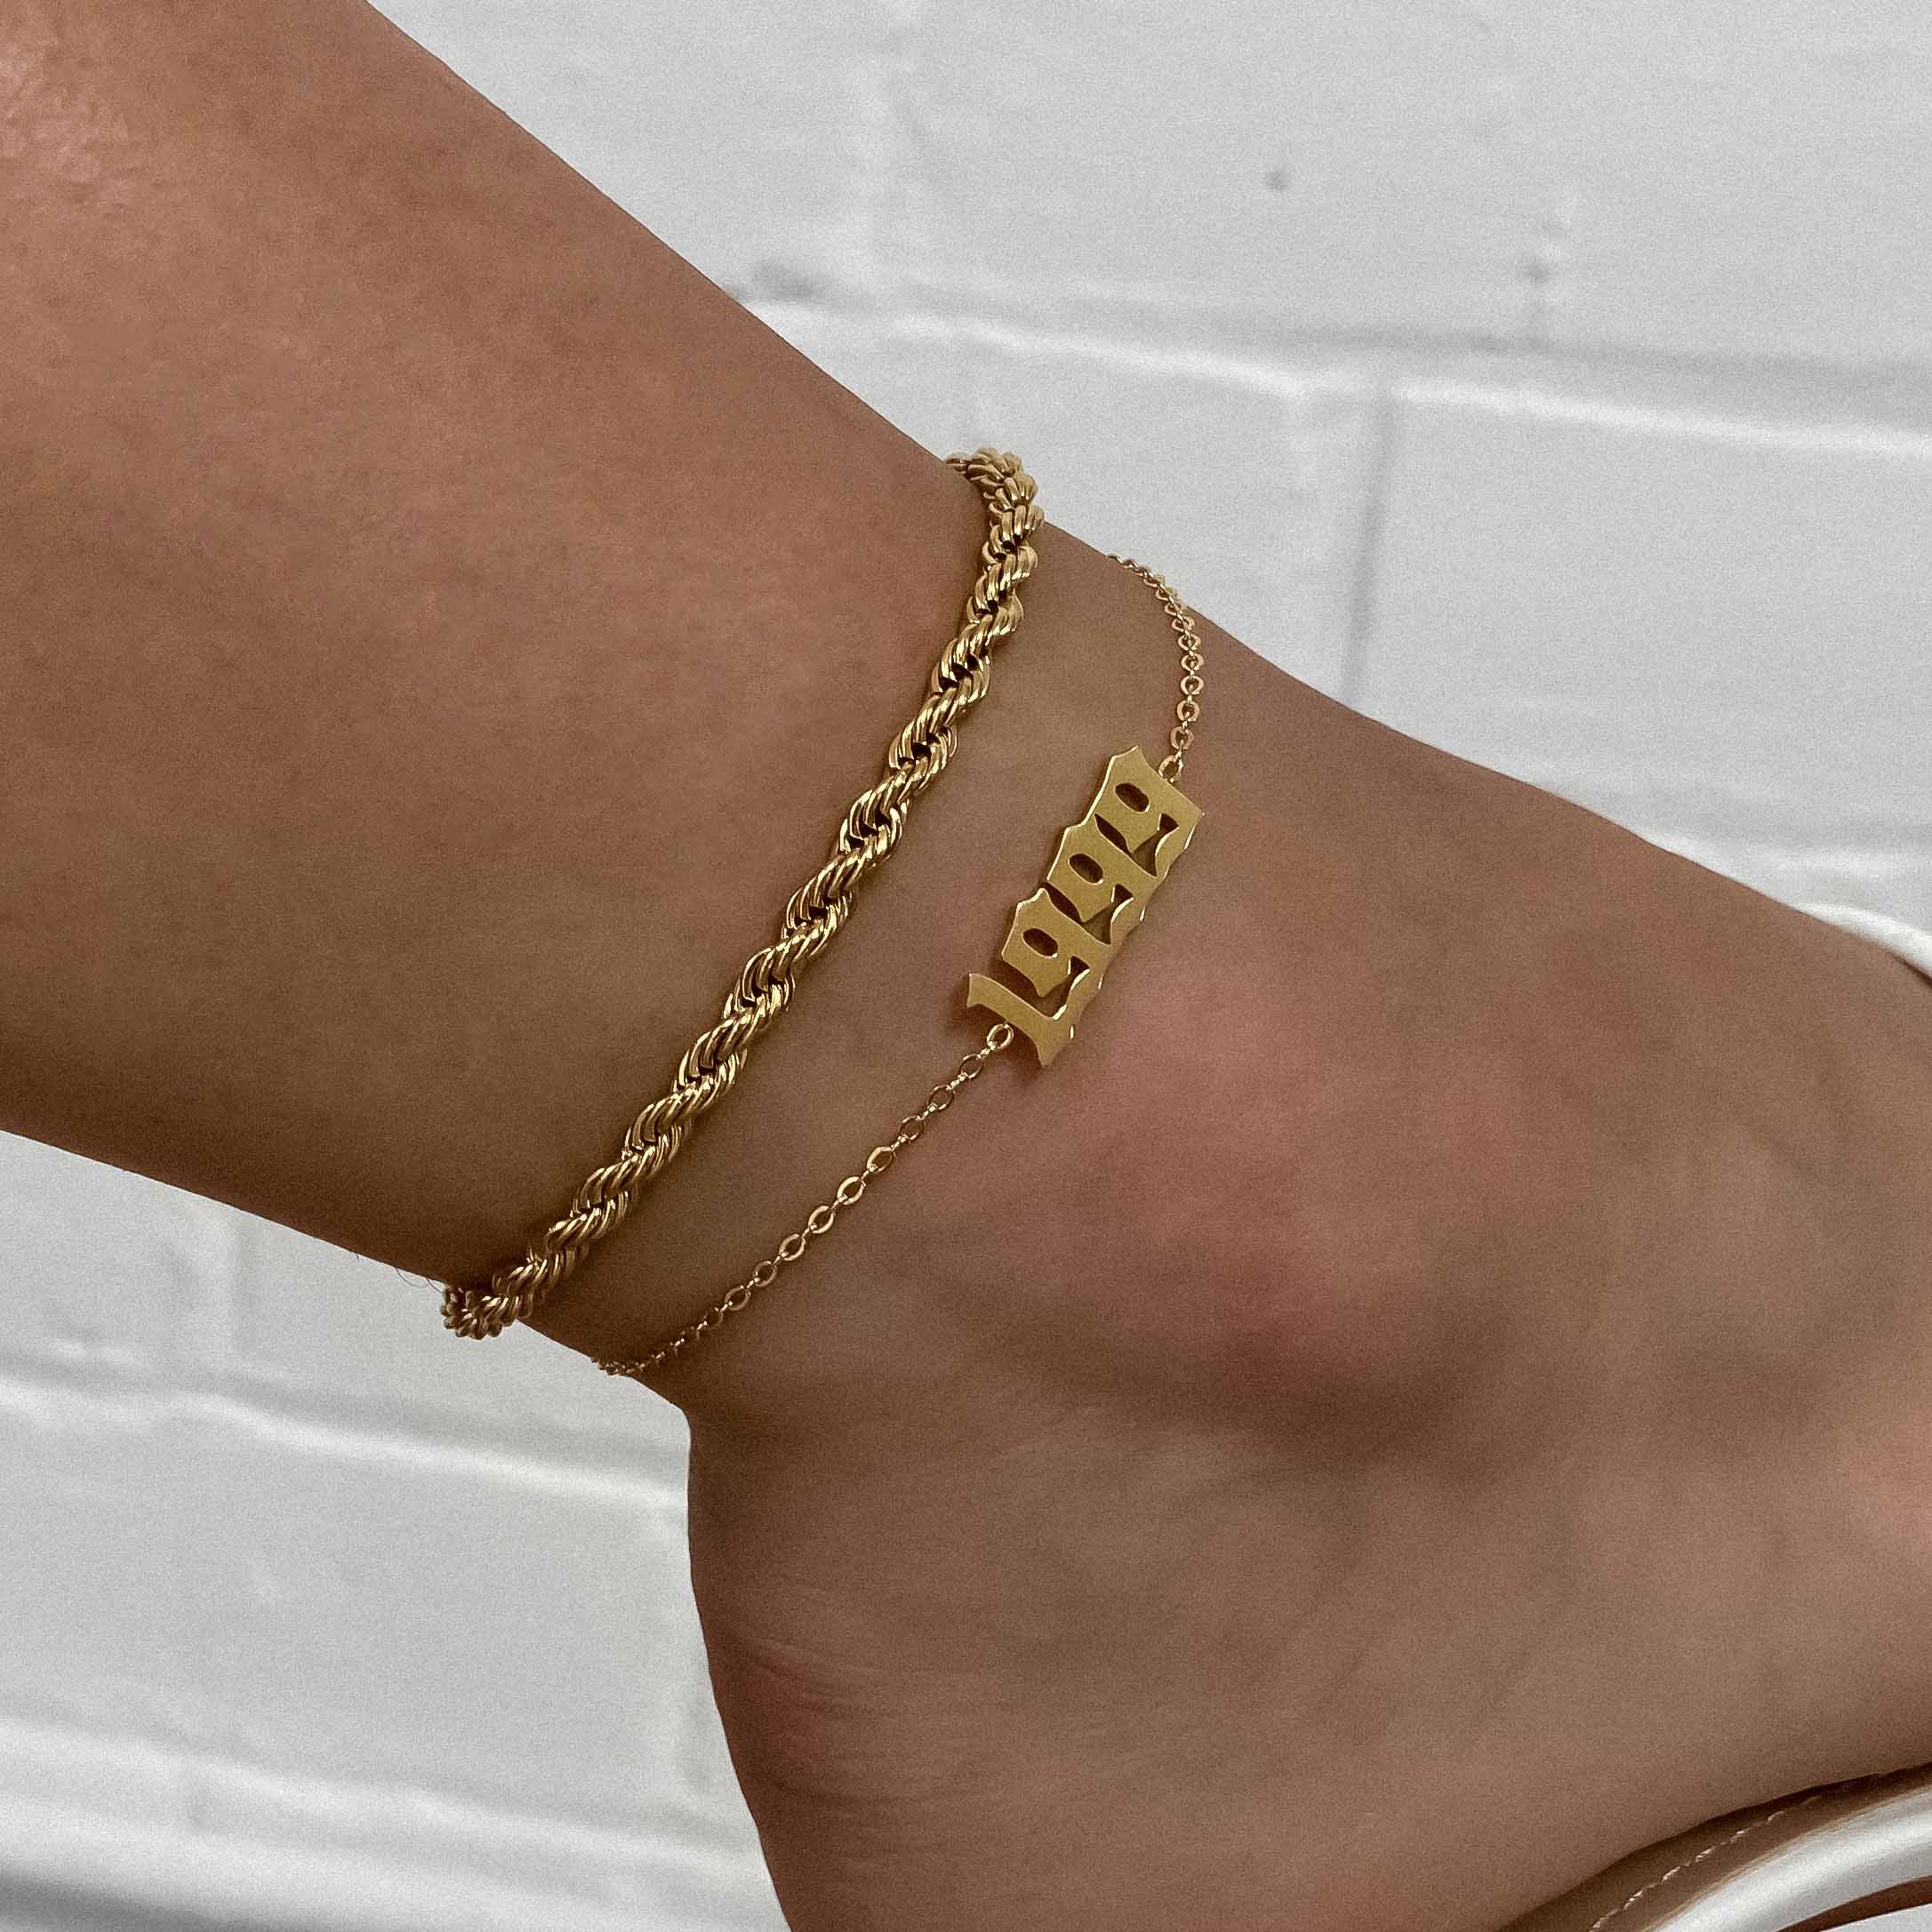 Gold birth year anklet paired with a gold twisted rope chain anklet